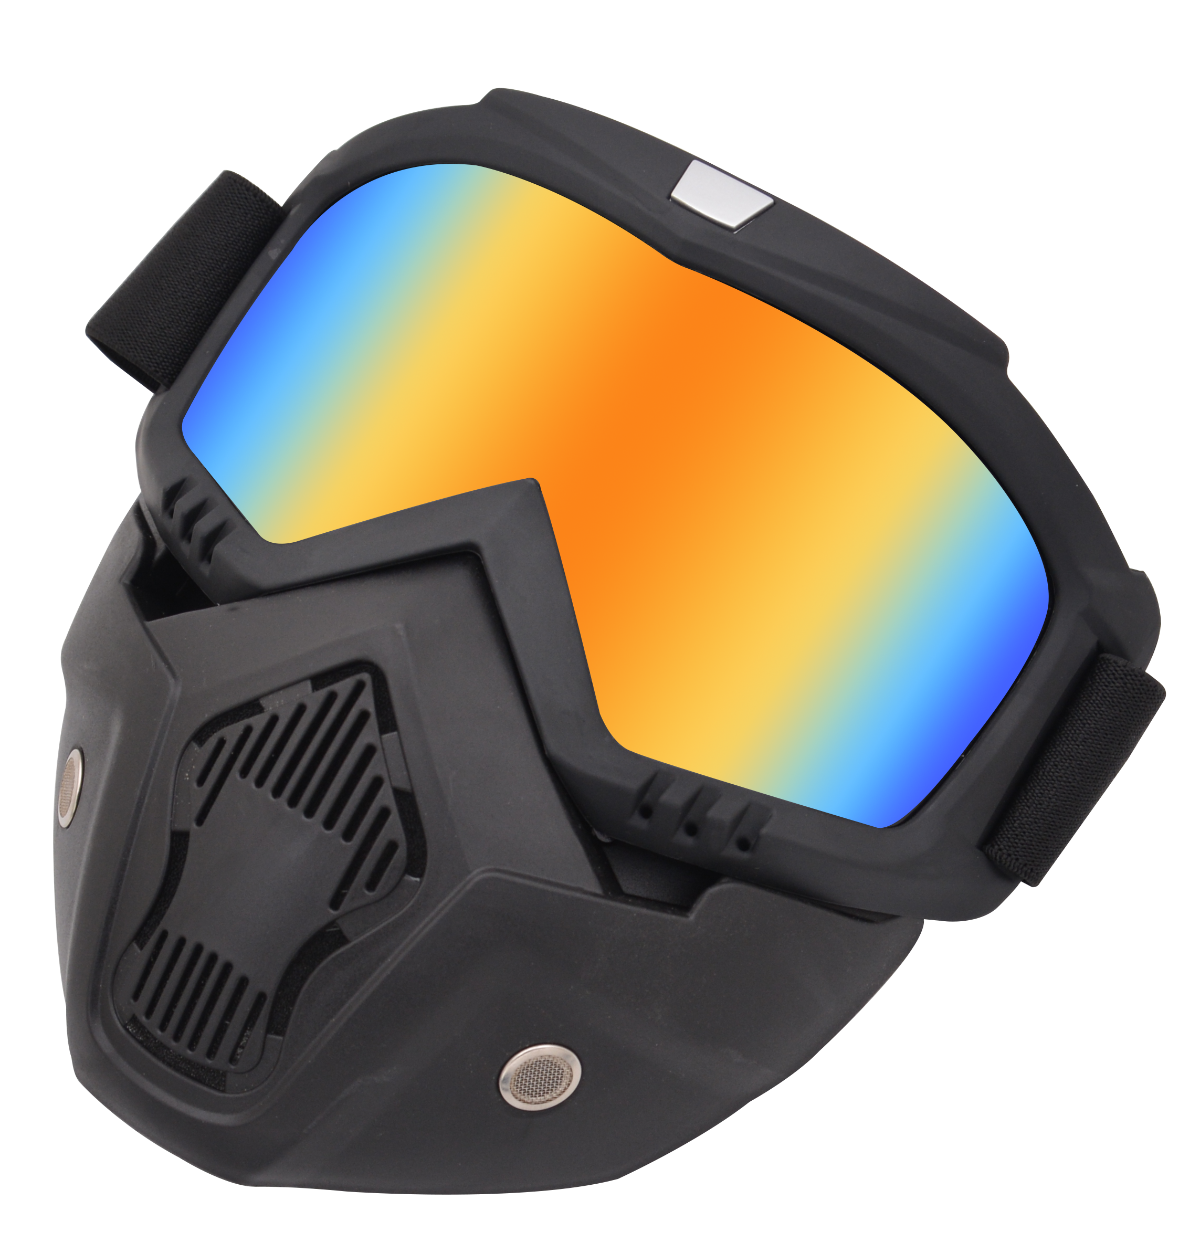 Motorcycle Goggles Mask, TPEE/Polycarbonate, Black Frame